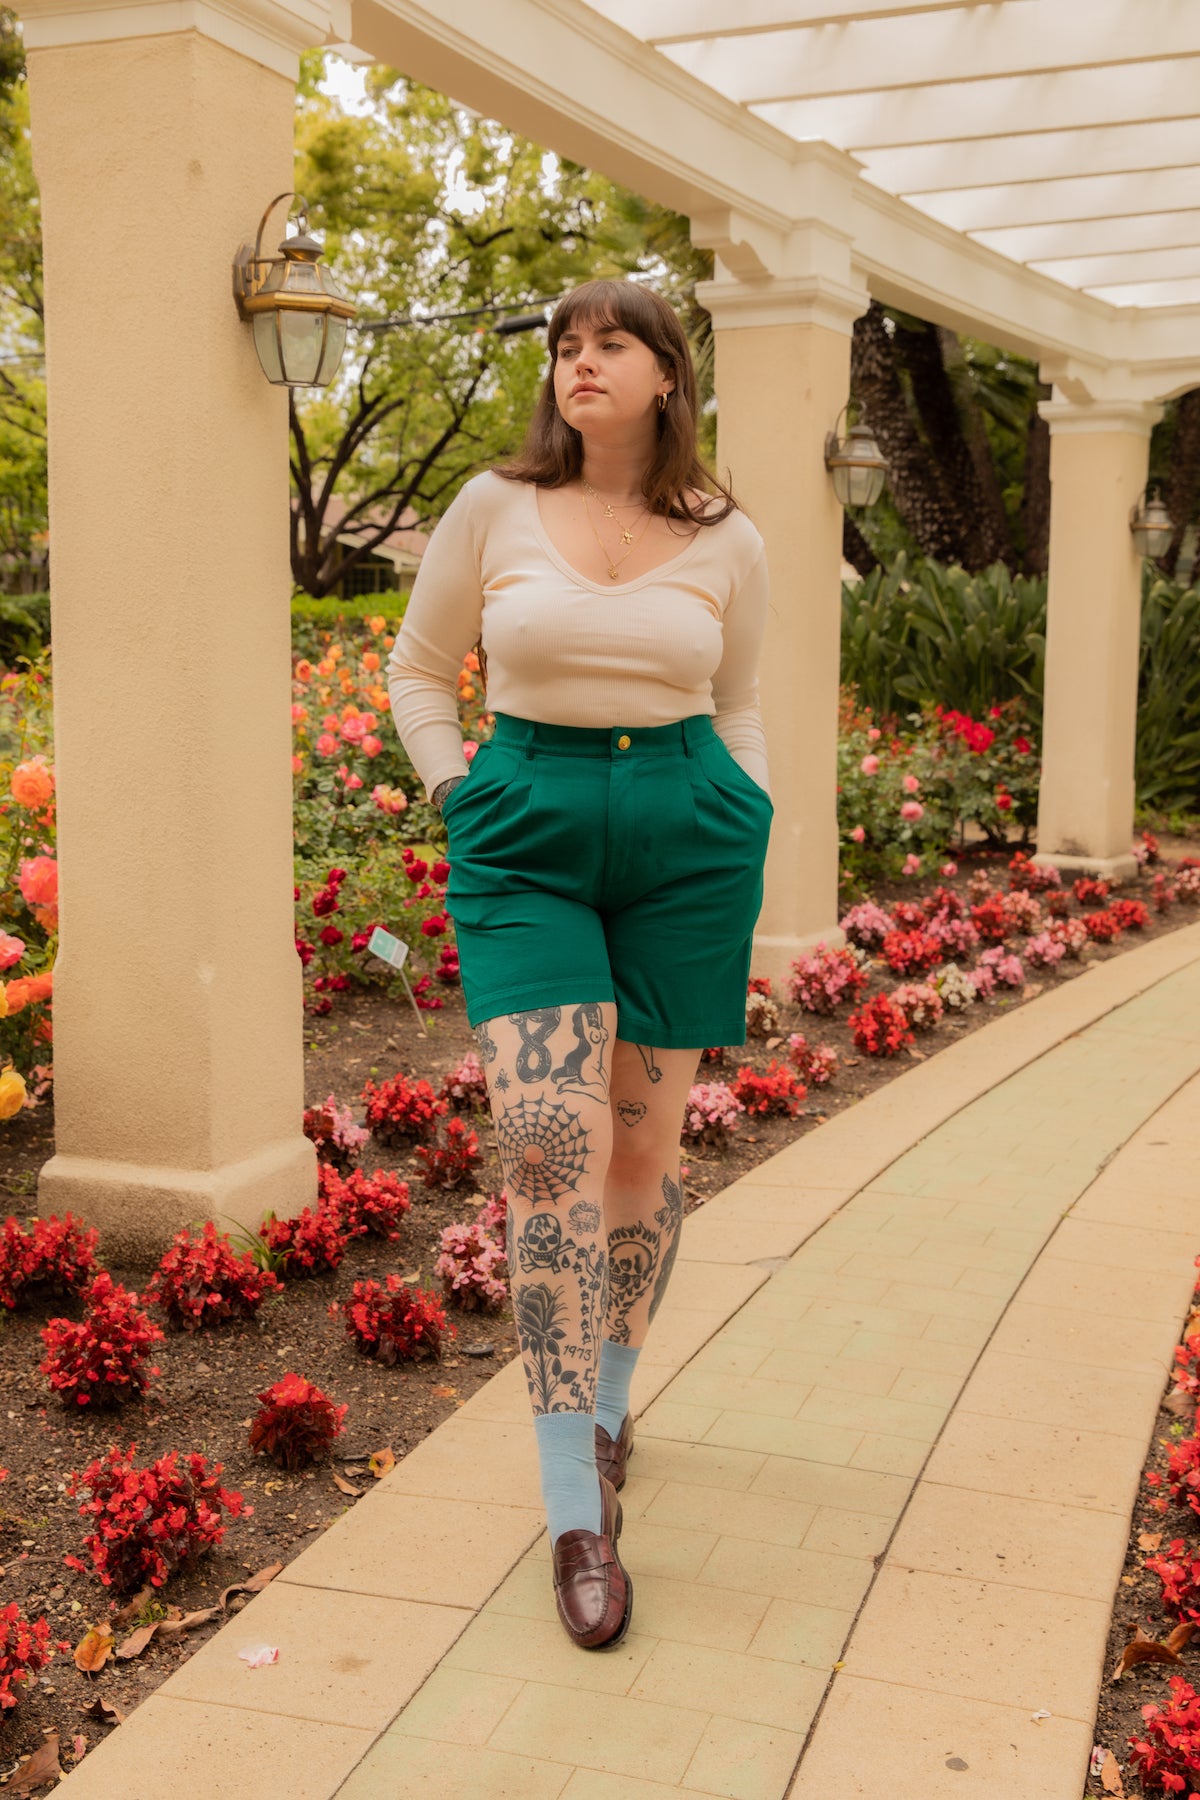 Sydney is wearing Long Sleeve V-Neck Tee in Vintage Off-White and Trouser Shorts in Hunter Green